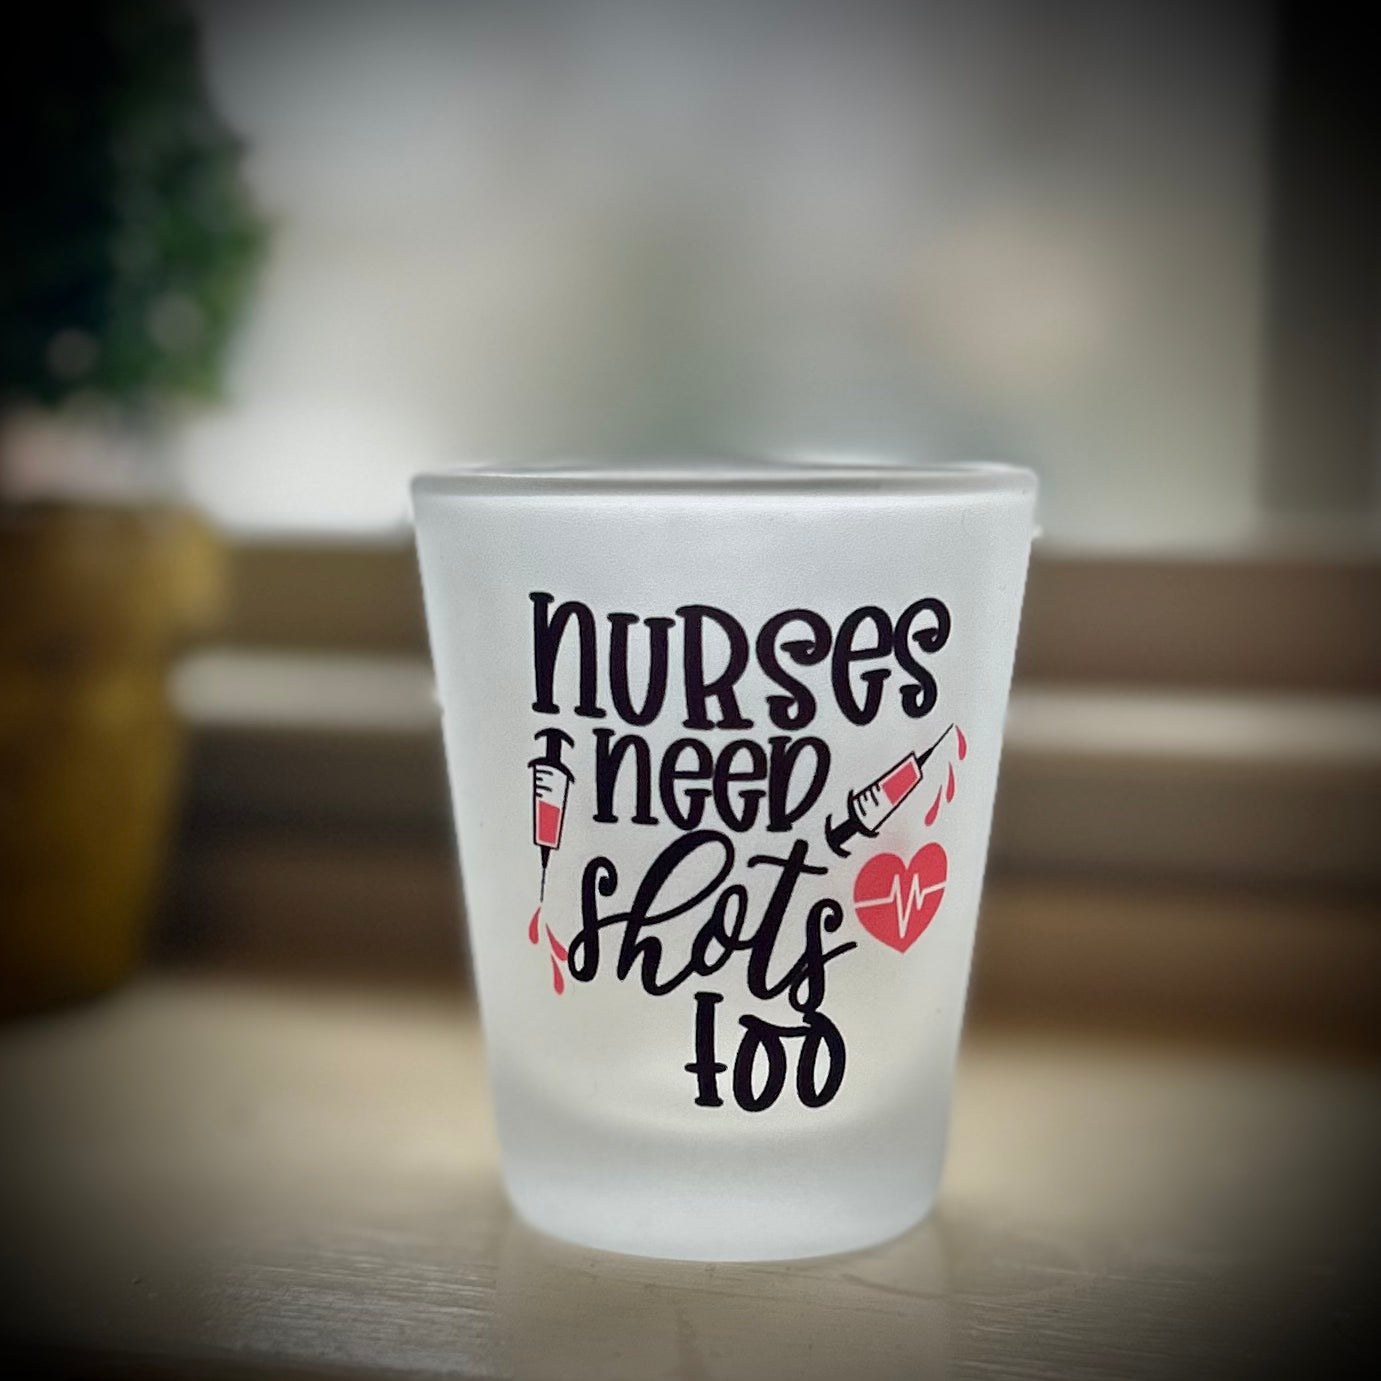 Nurse frosted shot glass